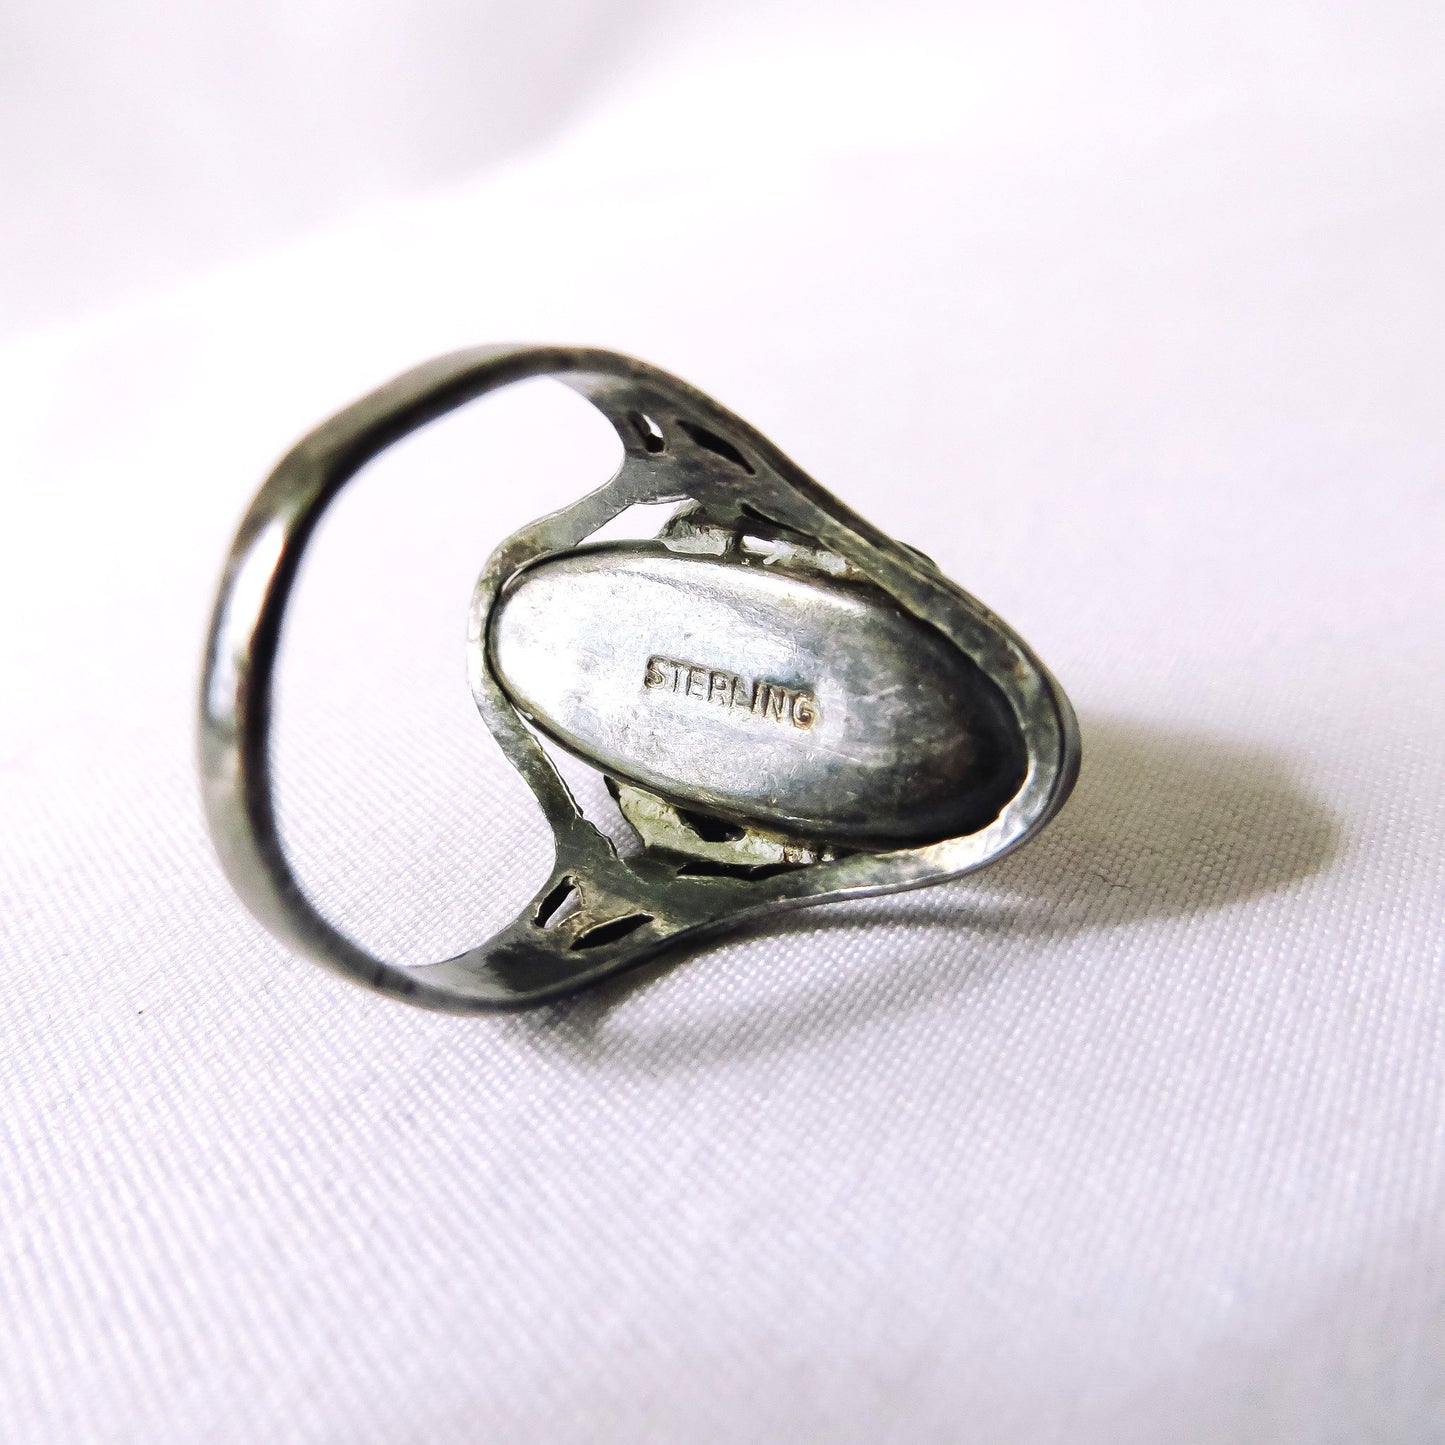 Vintage Blister Pearl and Sterling Silver Ring with Leaf Accents, Antique Victorian Ring, Size 5.75